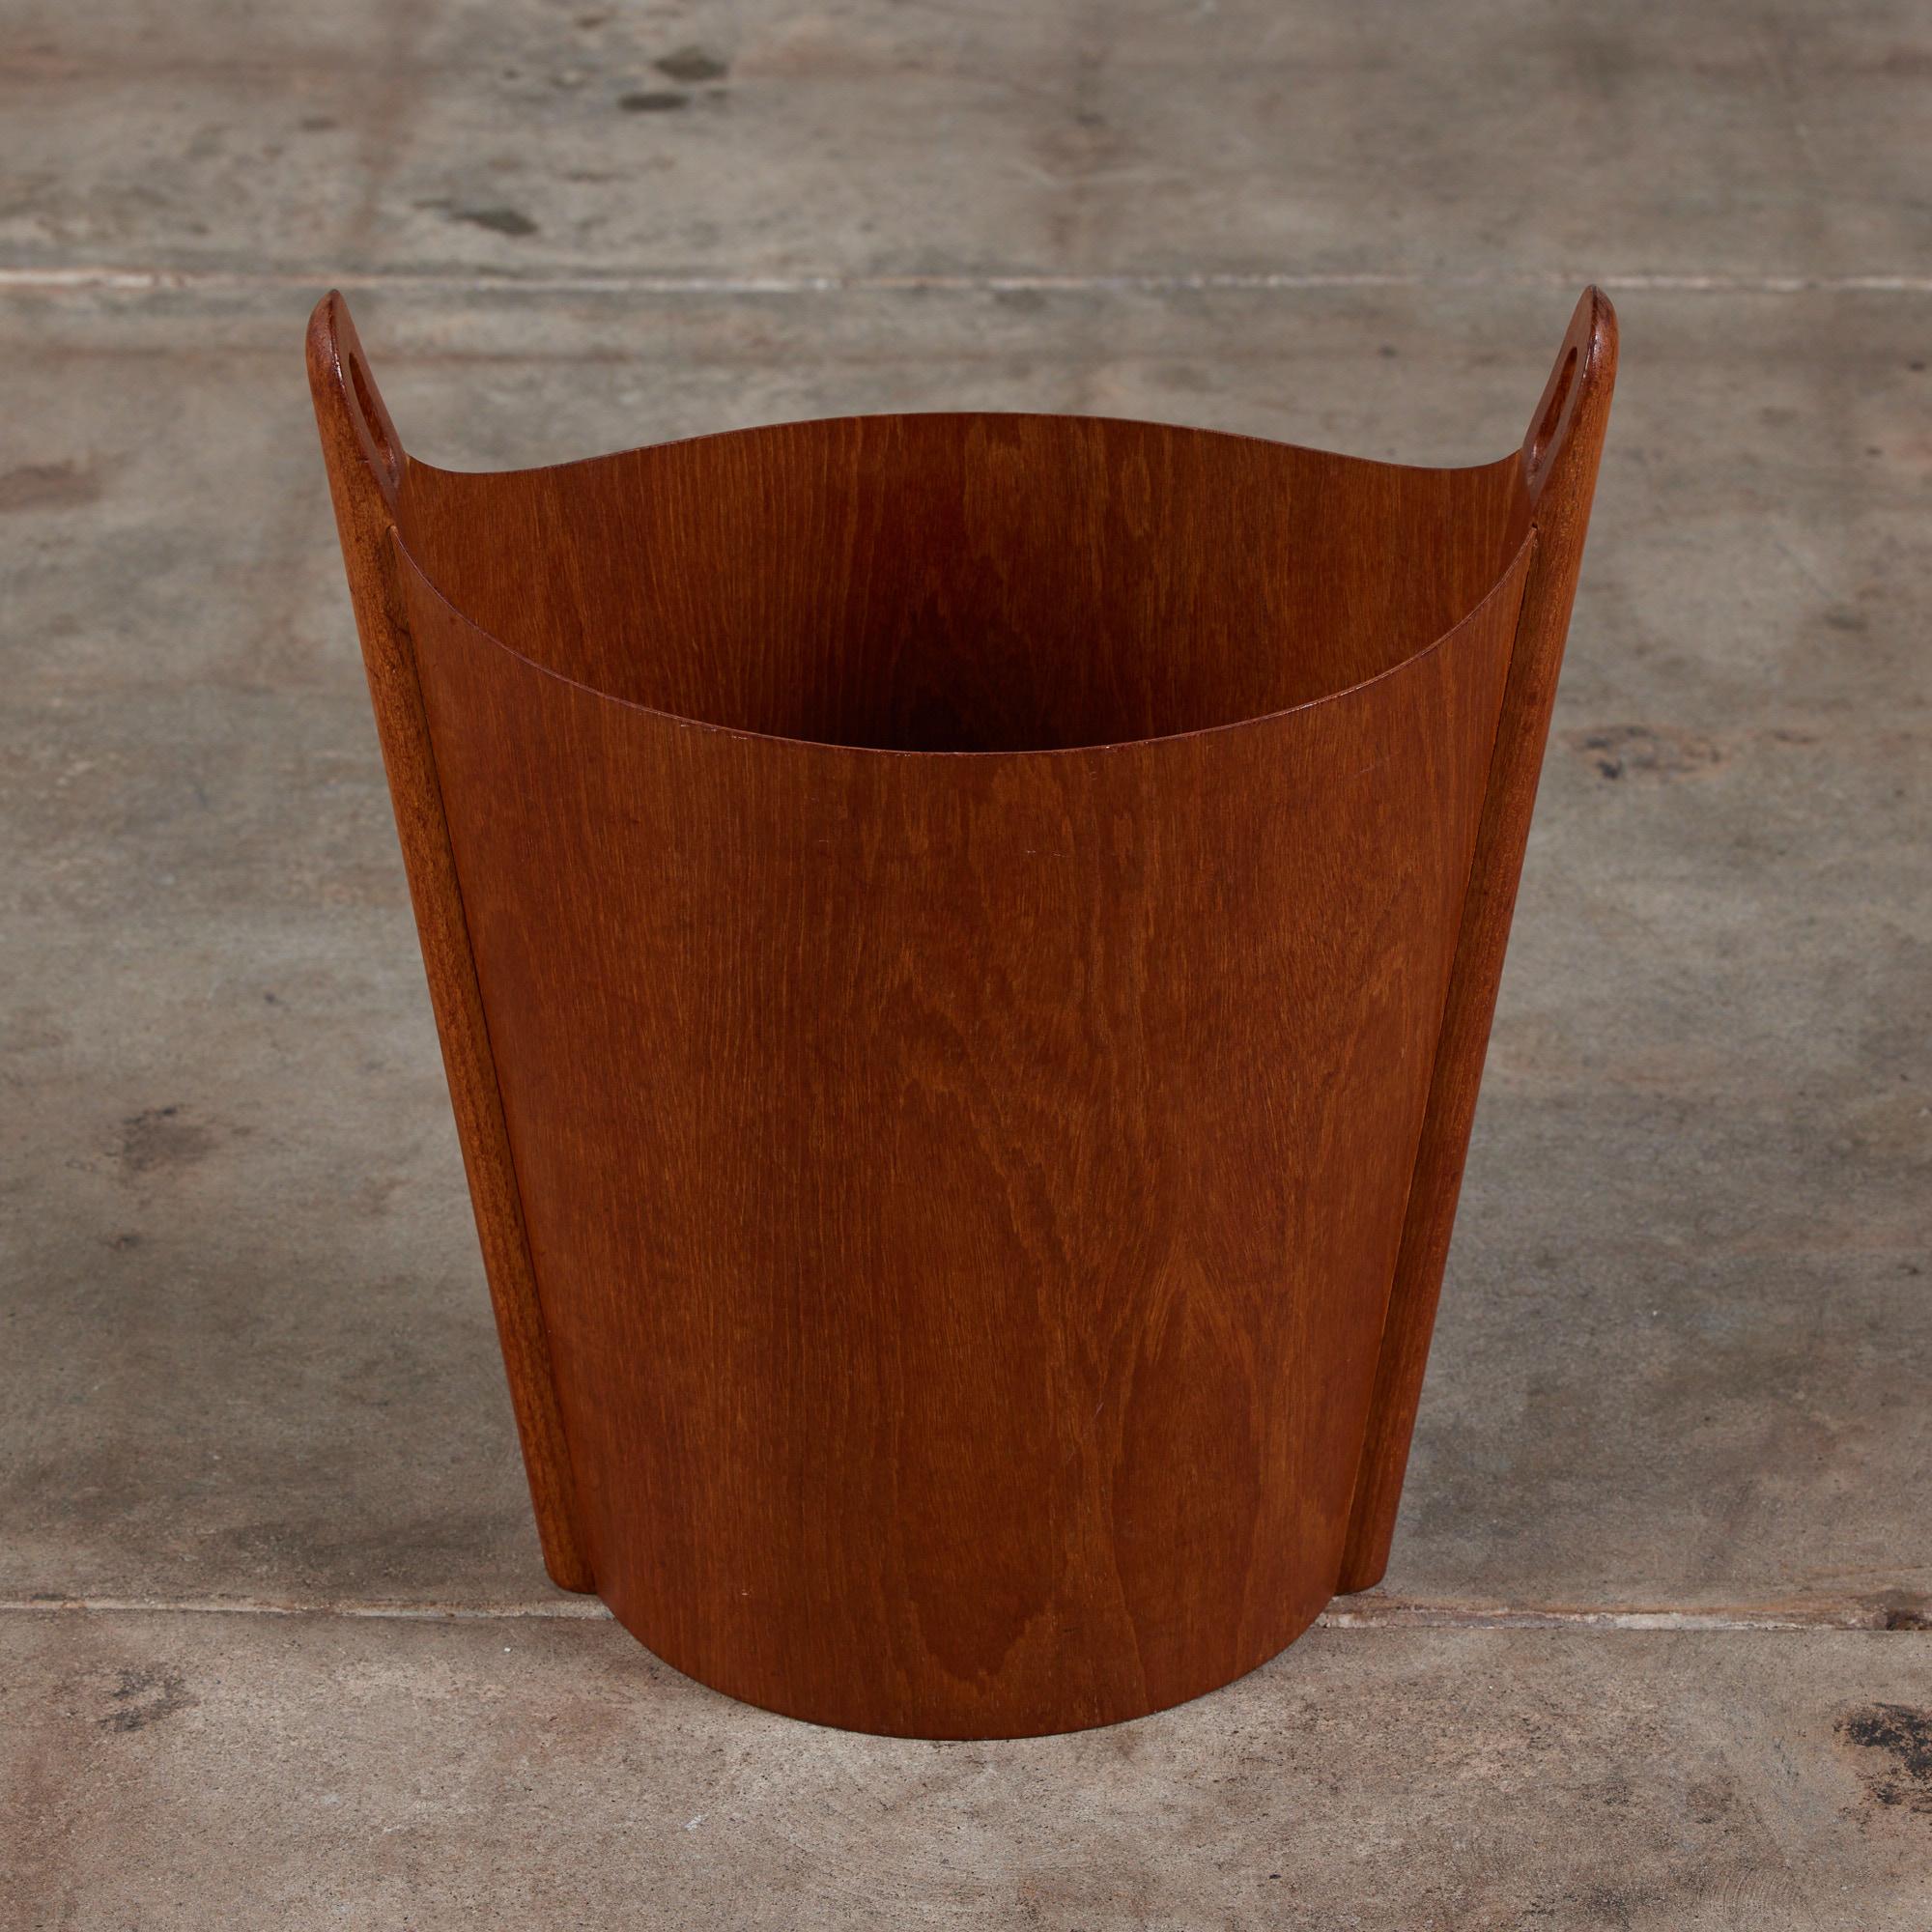 Wastebasket by Einar Barnes for P.S. Heggen, c.1960s, Norway. This bin features a thin teak plywood body and solid teak handles.

Dimensions: 15” width x 9” depth x 17.5